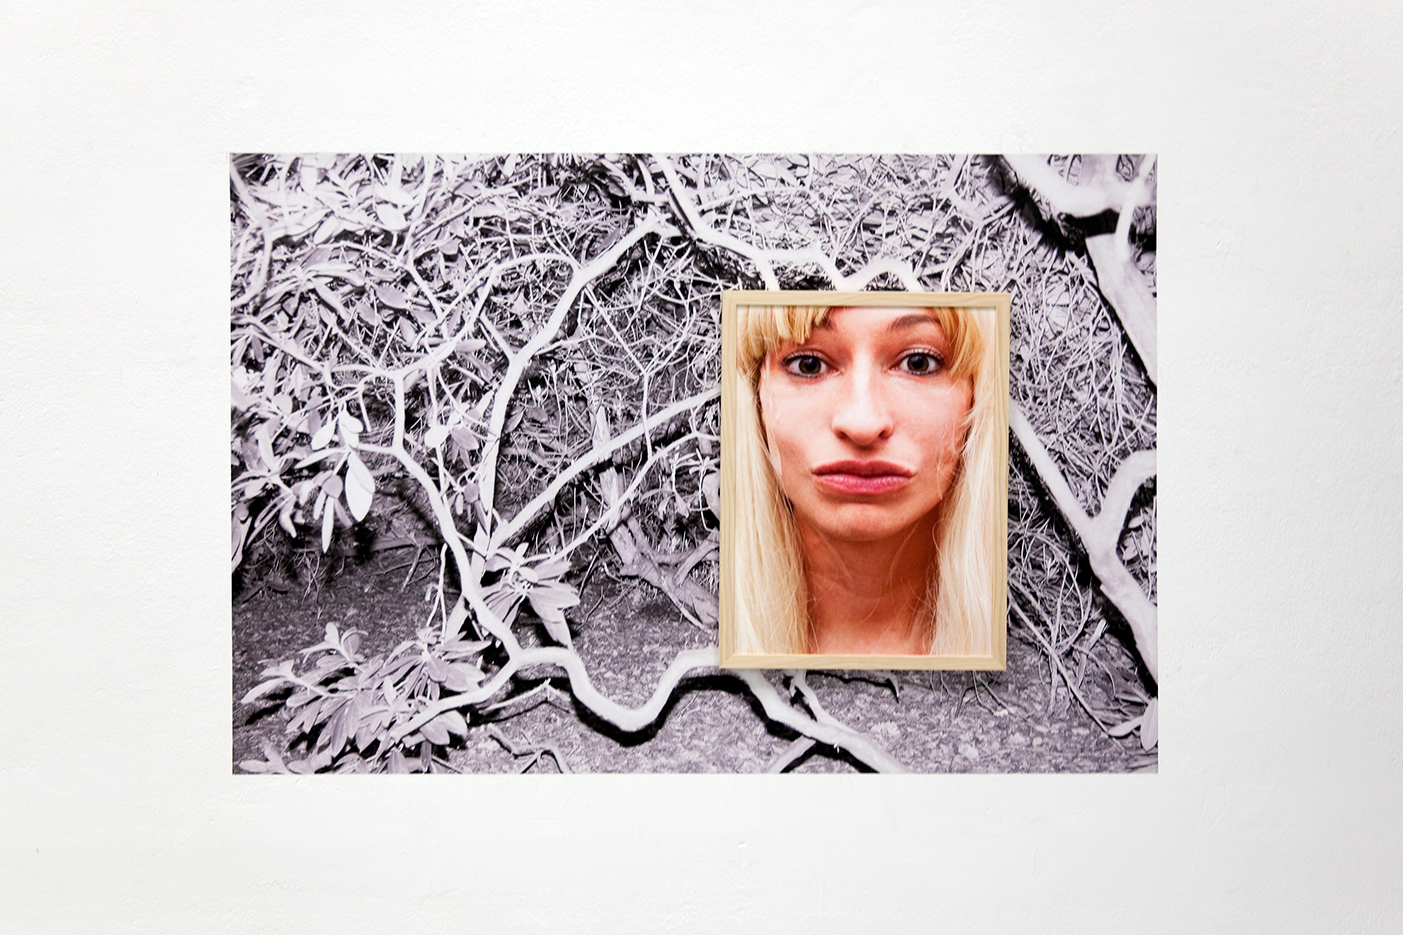 installationview - deatial befangen: a small framed image of a blondes wigged woman who is lifted with tpaes which are hidden under her wig hangy on top aof a larger pasted black an white image of the underwoods of a rhododendron hain